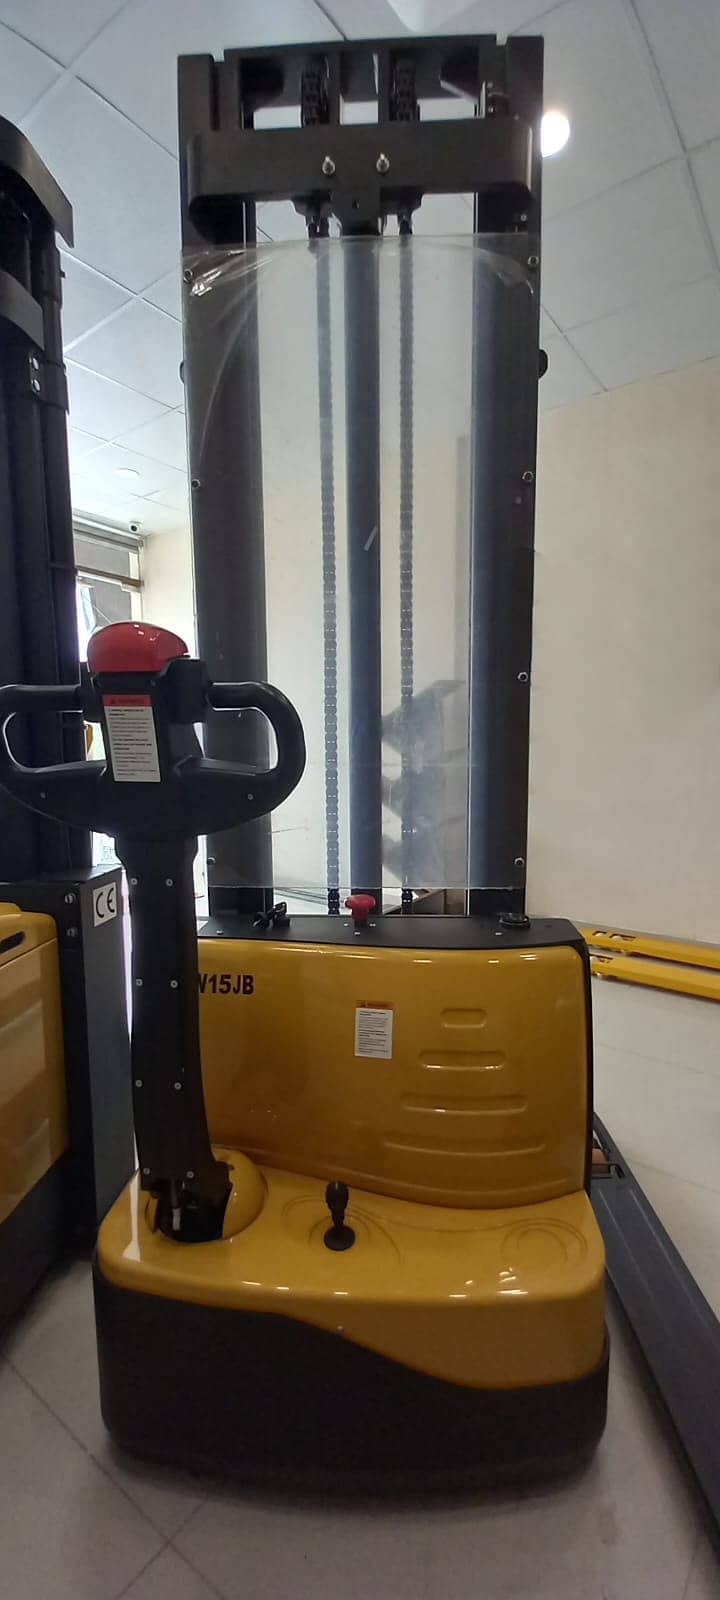 electrical forklifter, manual stacker, battery lifter, manual lifter, 19